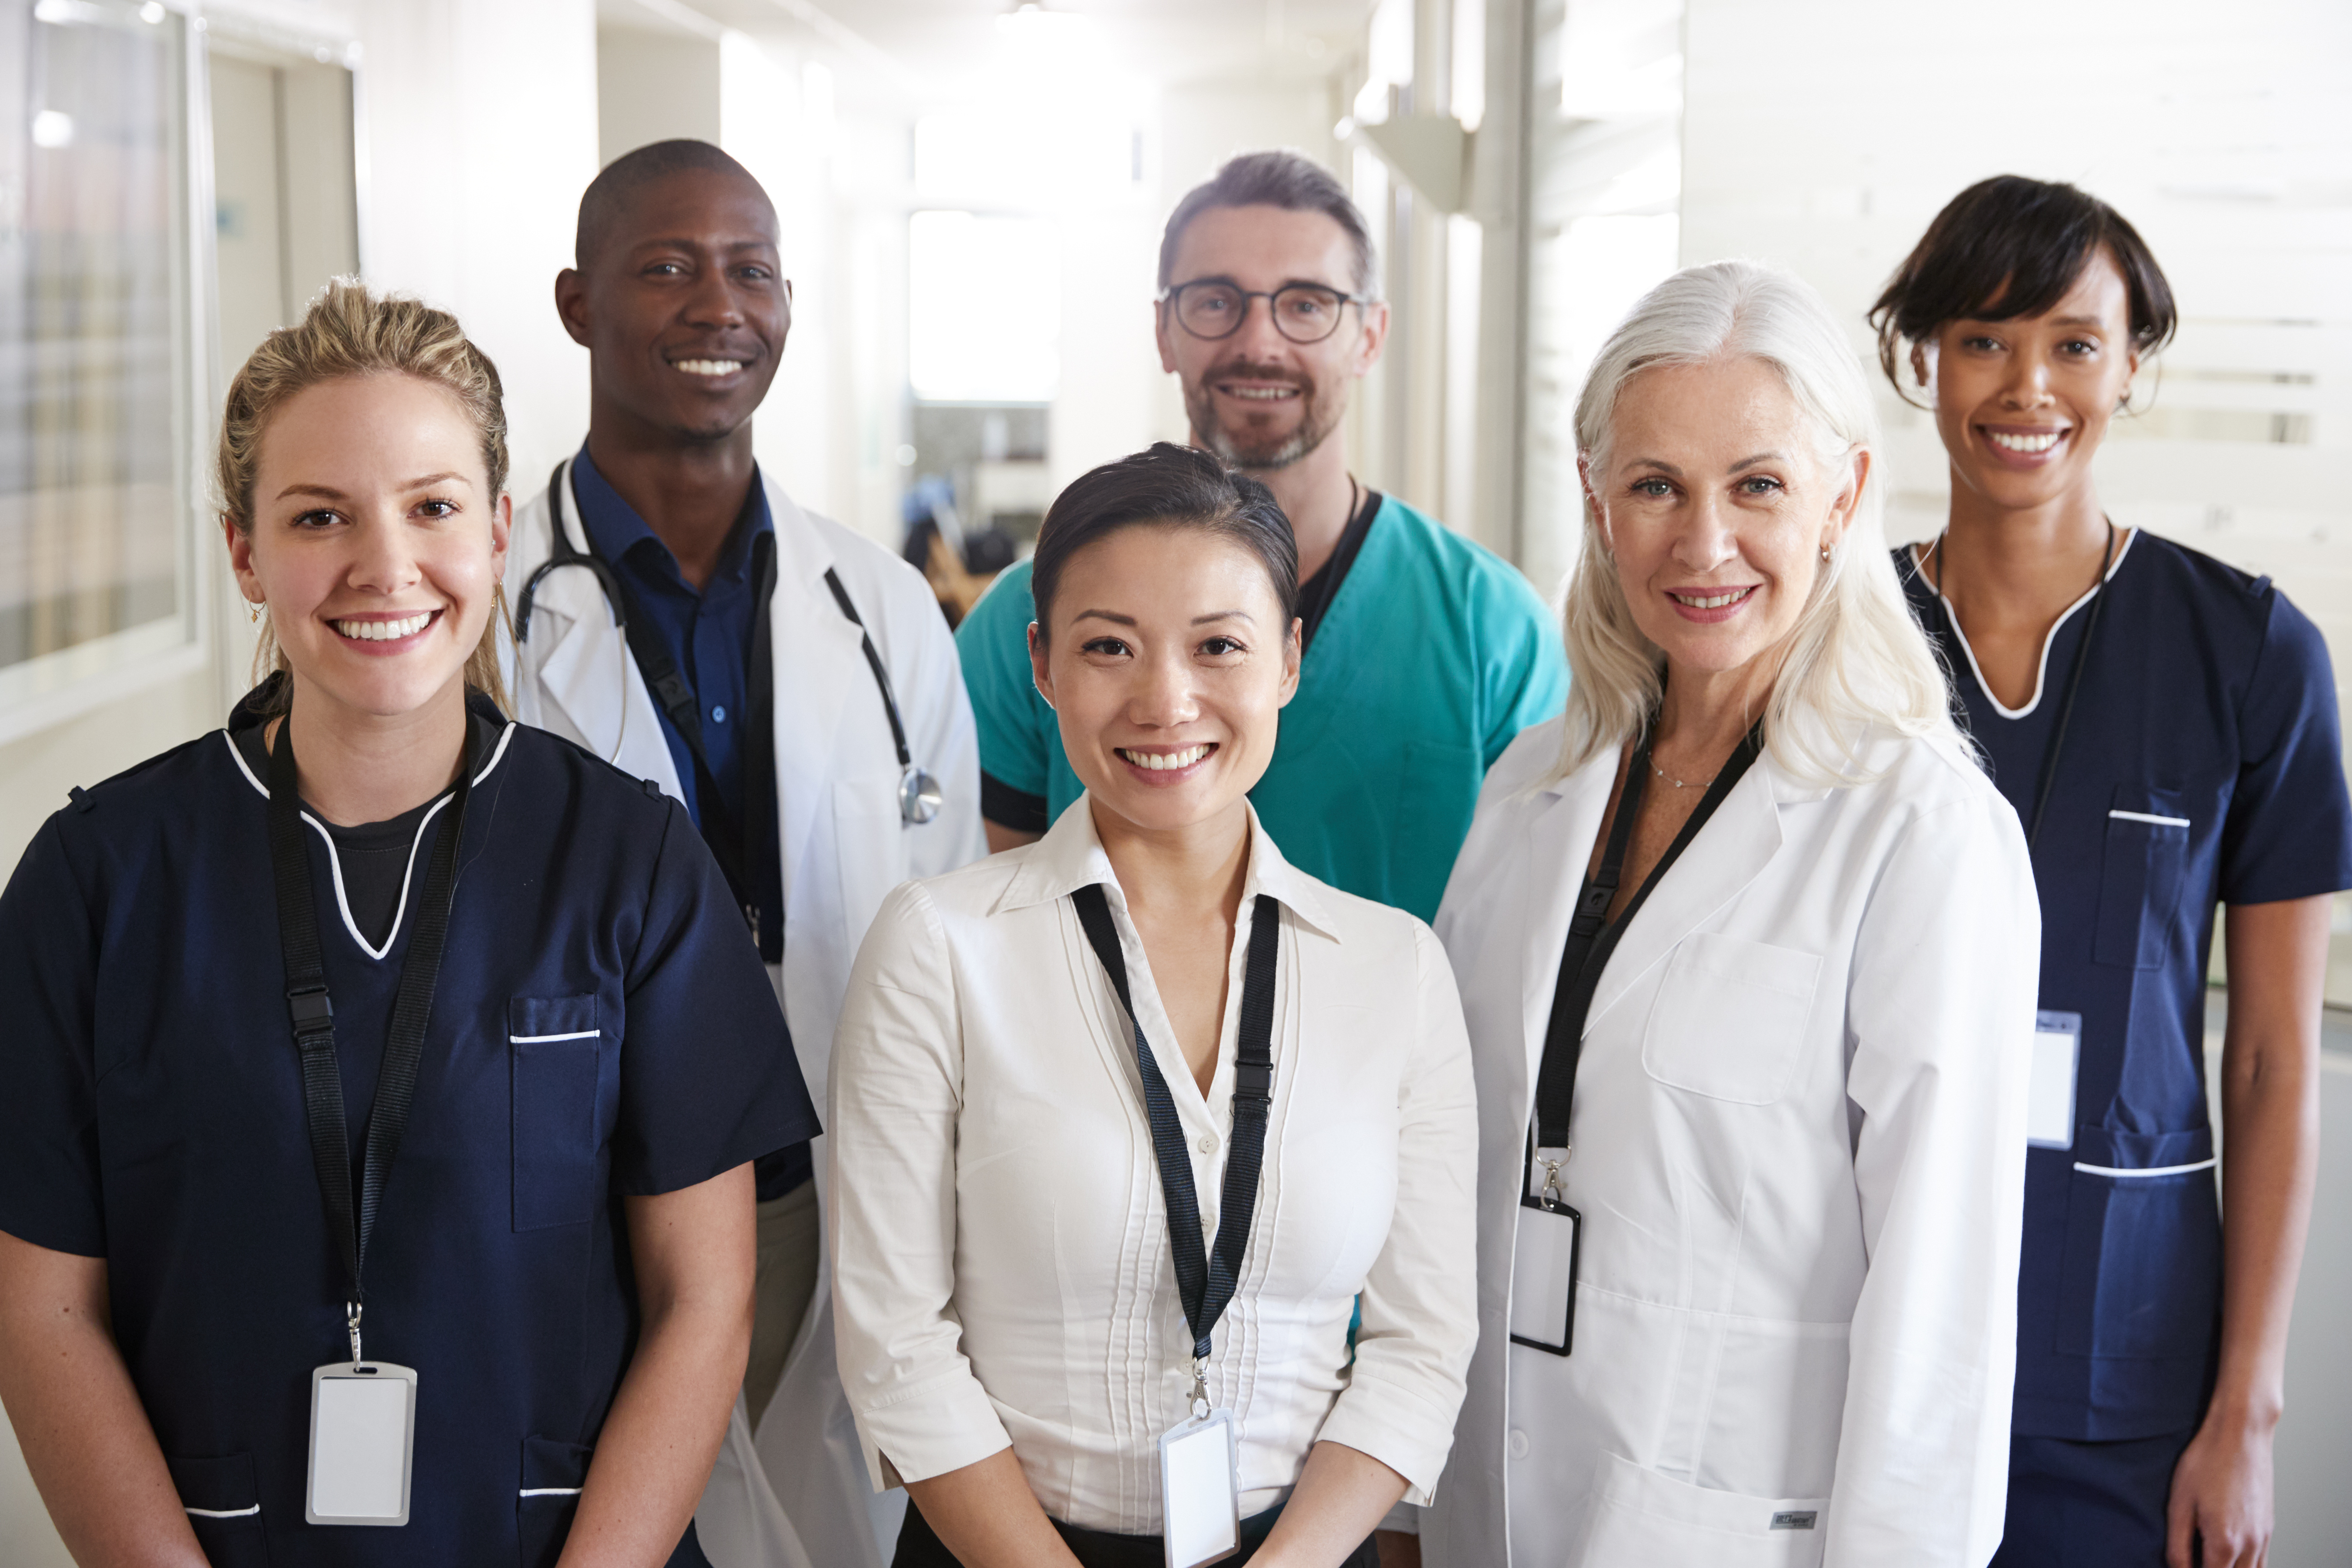 Image of a diverse group of health care providers.